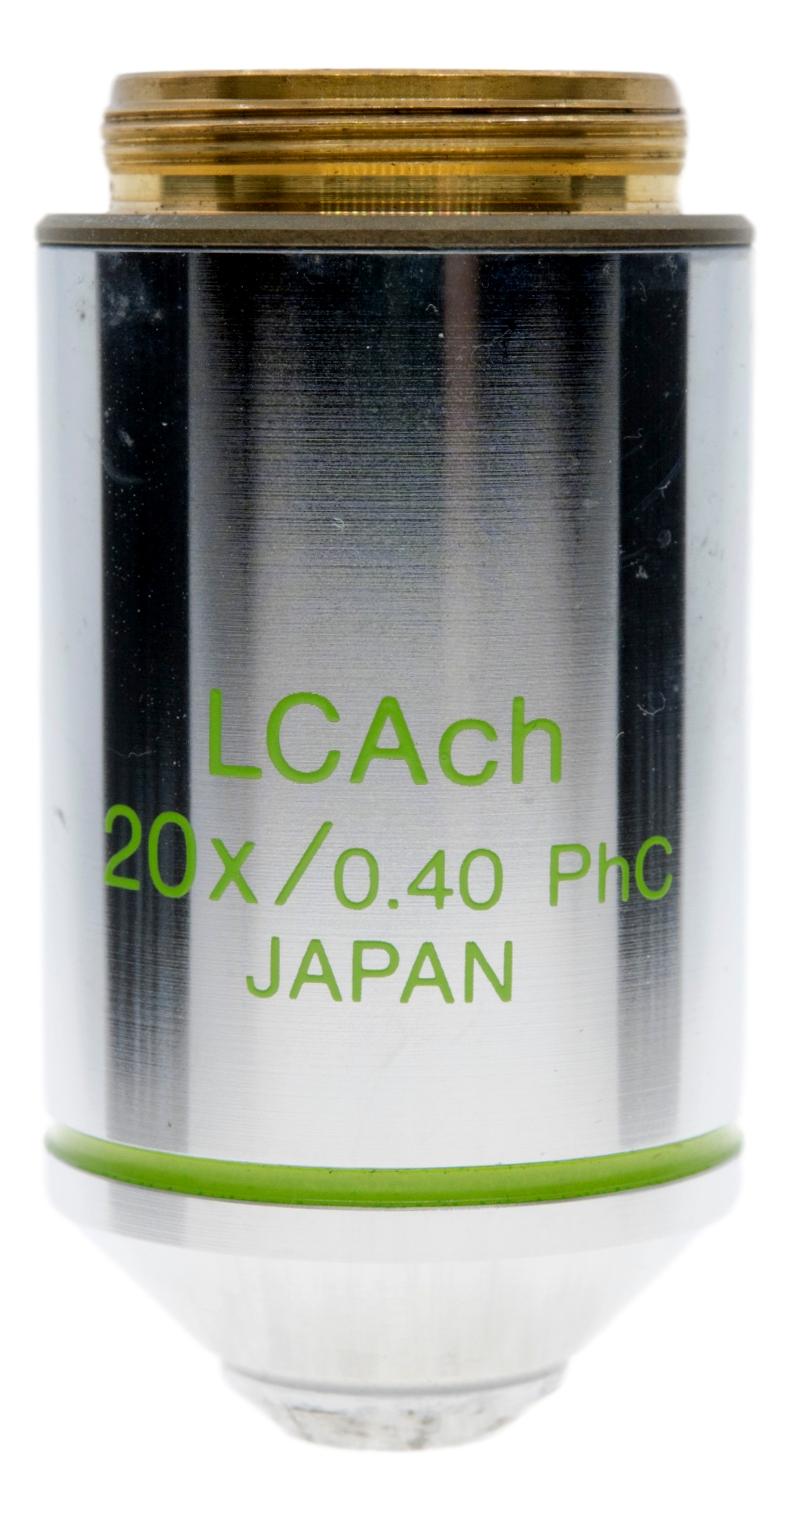 Olympus 20x LCAch Infinity-Corrected PhC Phase Contrast Objective